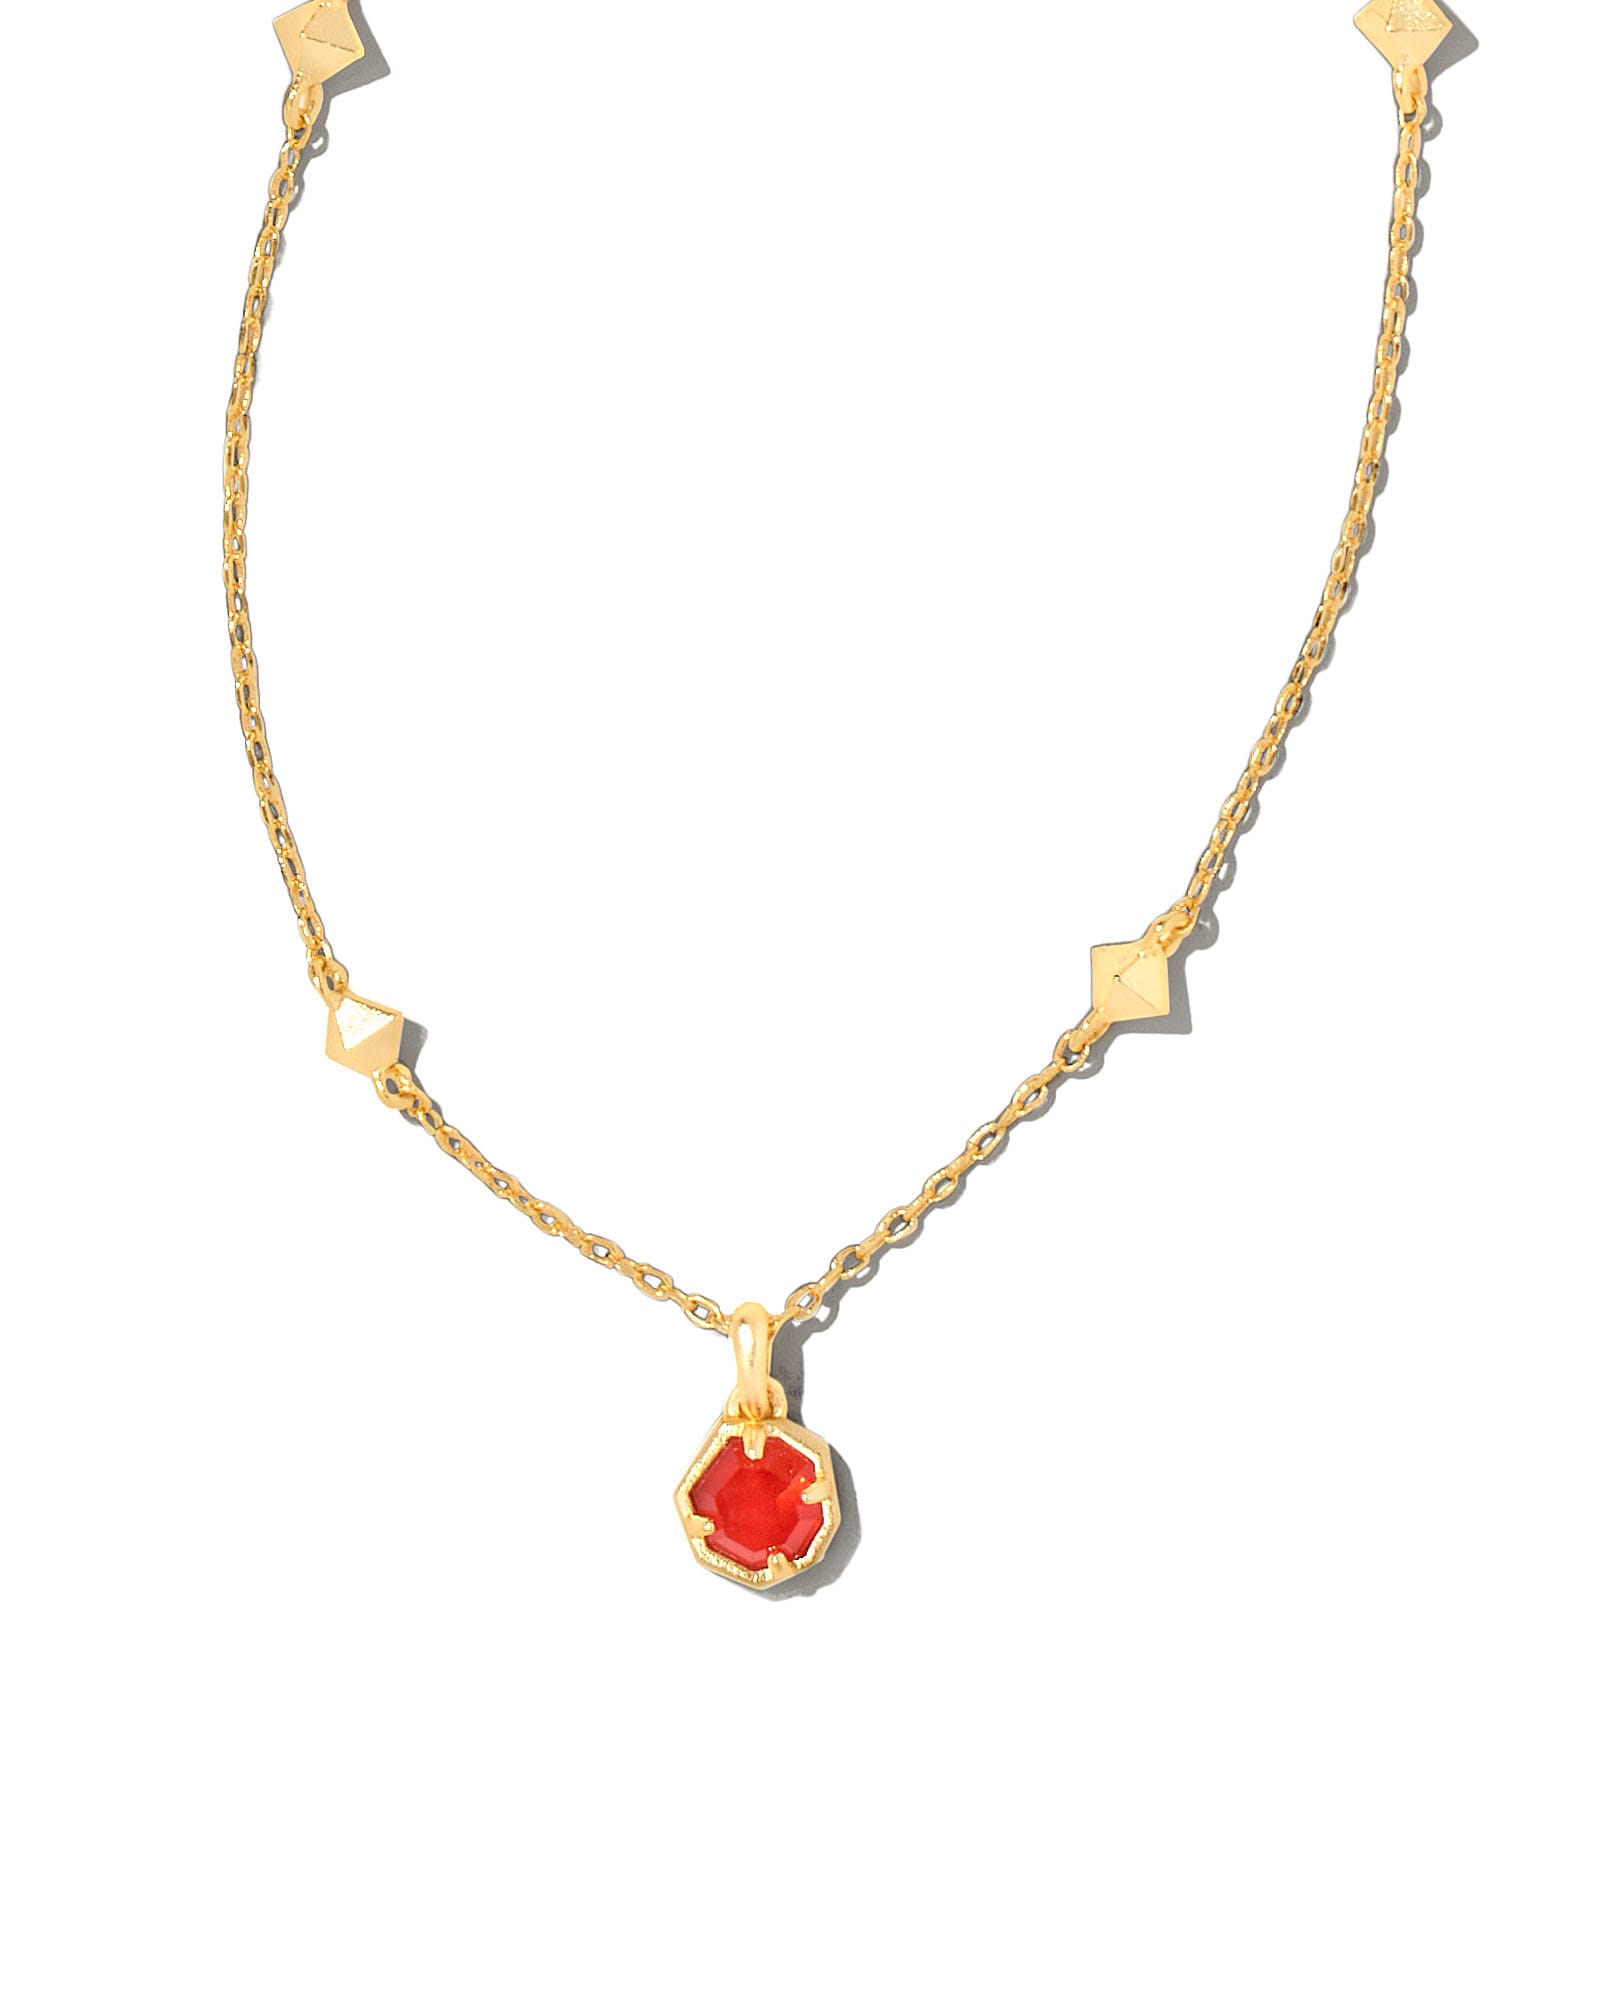 Kendra Scott Nola Gold Pendant Necklace in Red Illusion | Glass/Mother Of Pearl